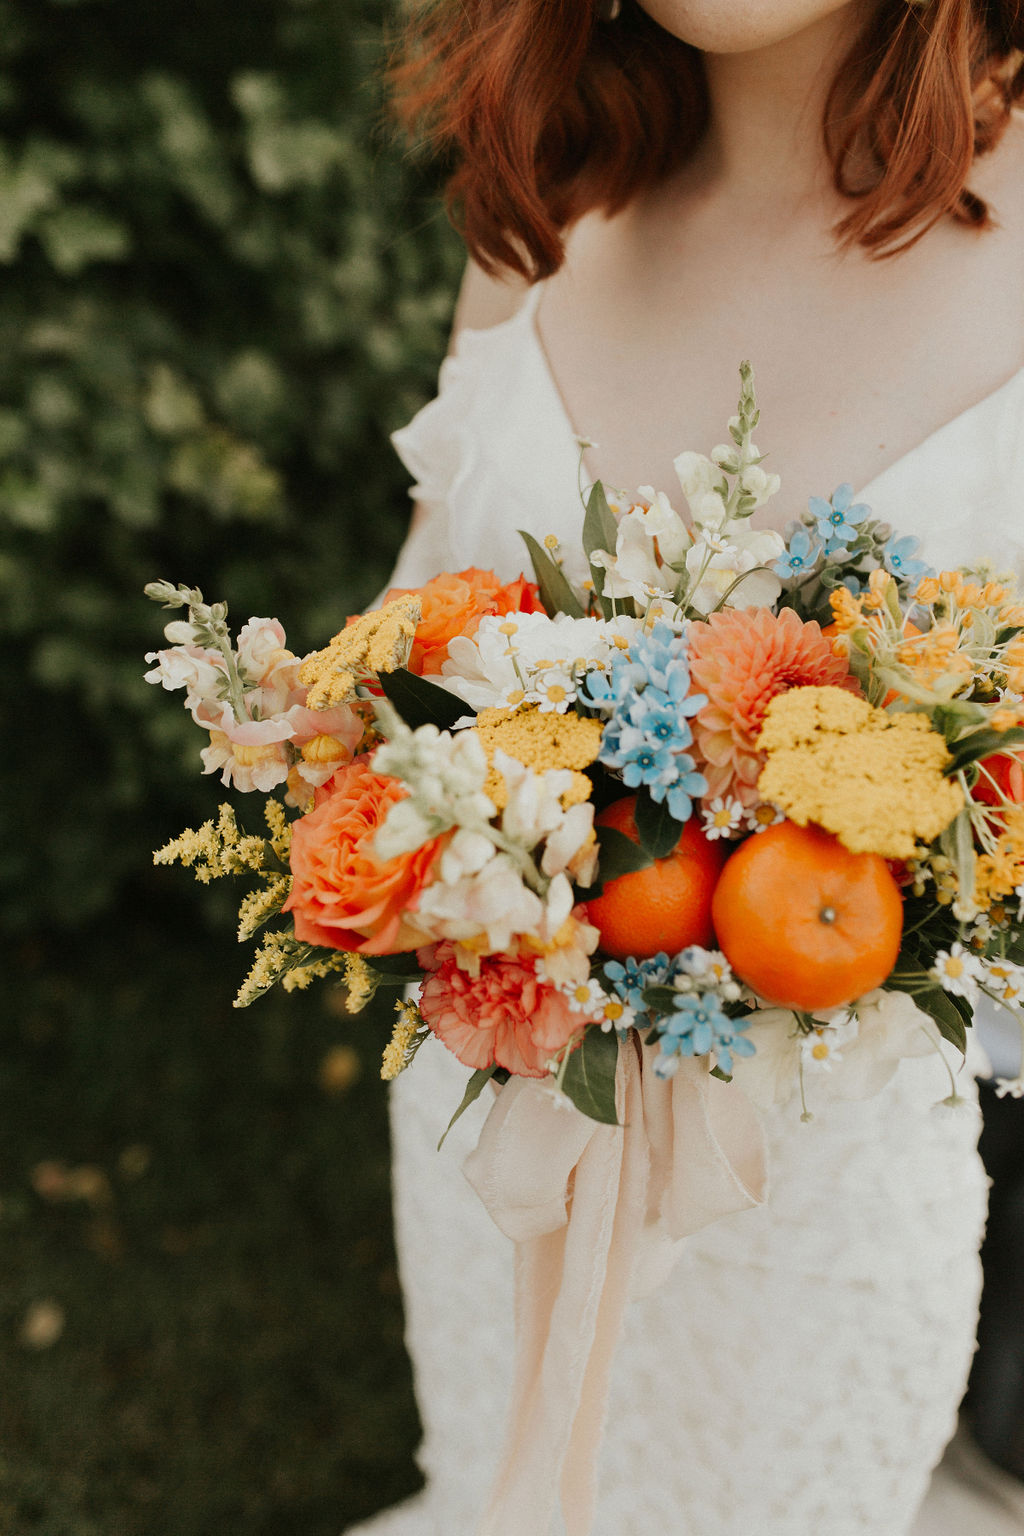 Tangerine inspired bridal bouquet with orange, peach and blue hues